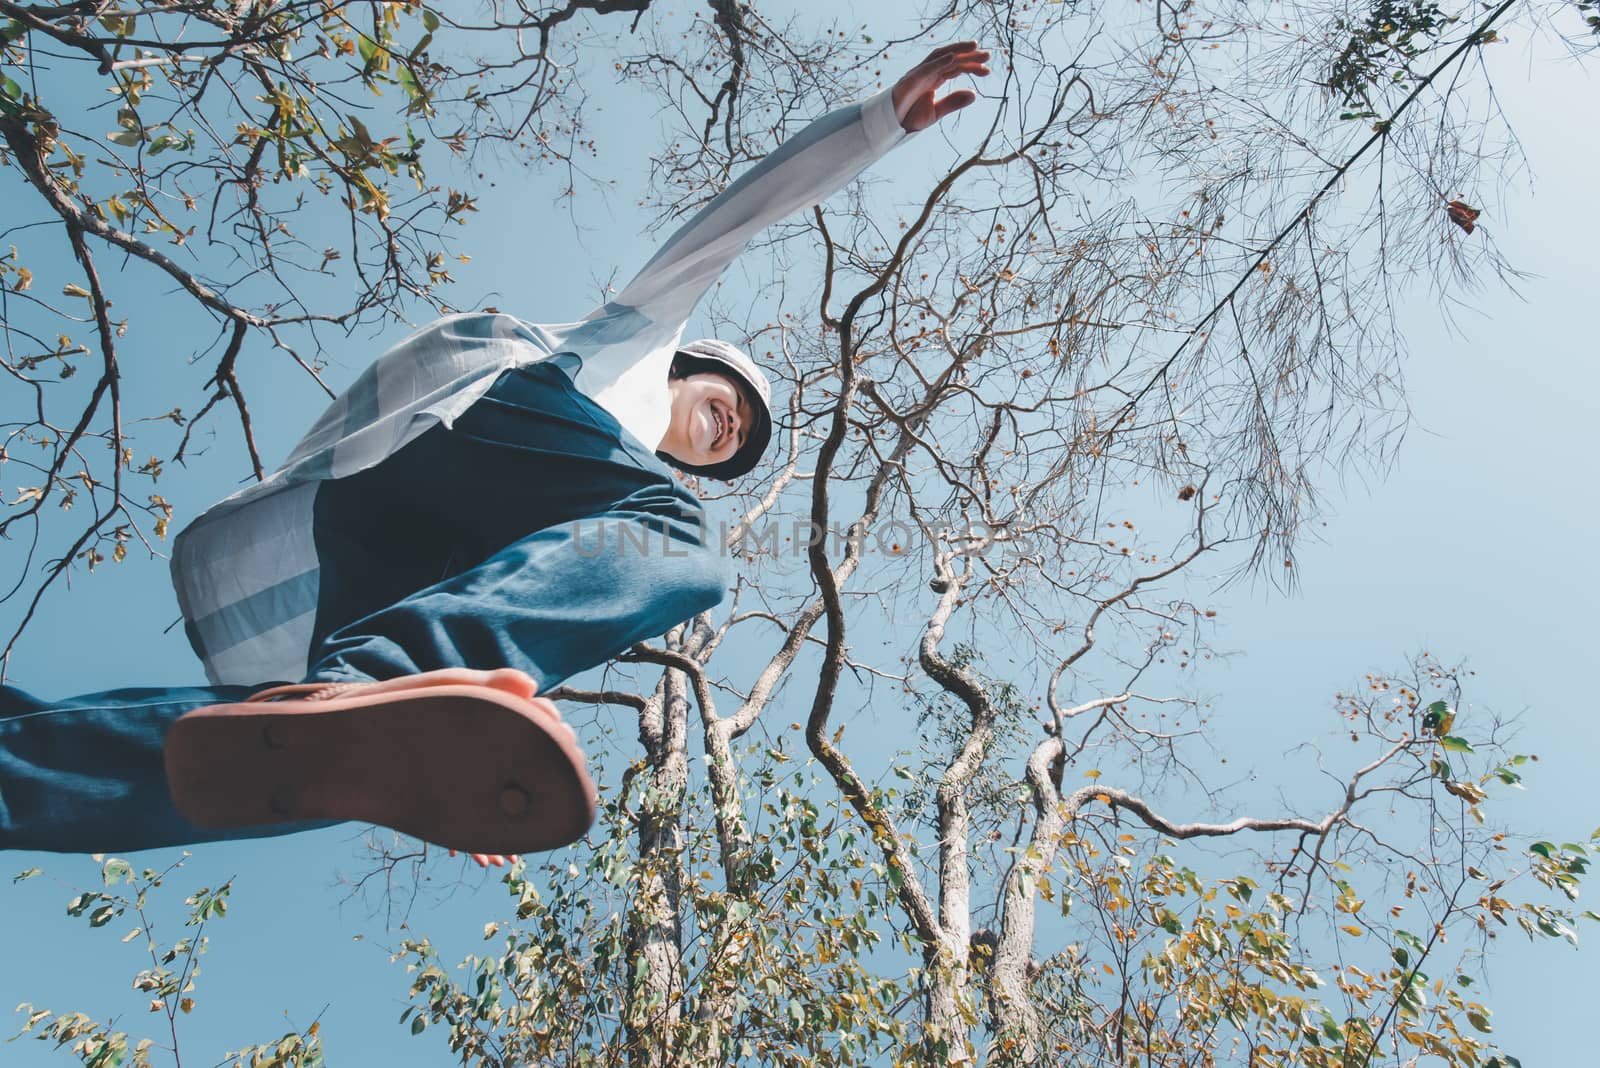 Low angle view of woman midair by jumping, crossing step over the camera shot below in forest with tree and sky overhead in concept travel, active lifestyle, overcome obstacles in life or future